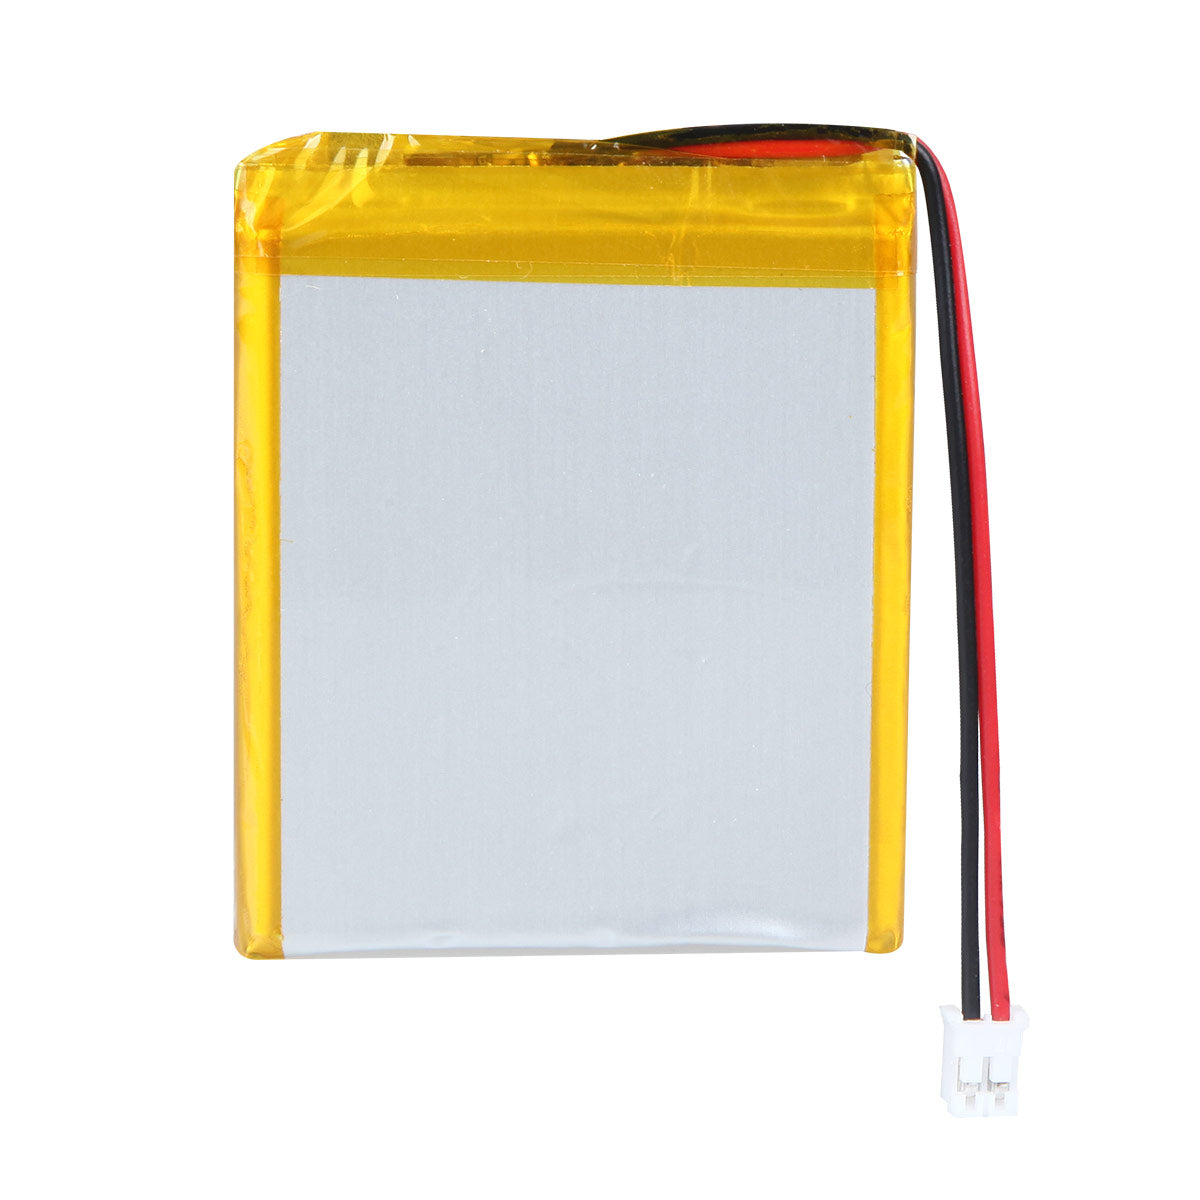 YDL 3.7V 2000mAh 545163 Rechargeable Polymer Lithium-Ion Battery Length 65mm